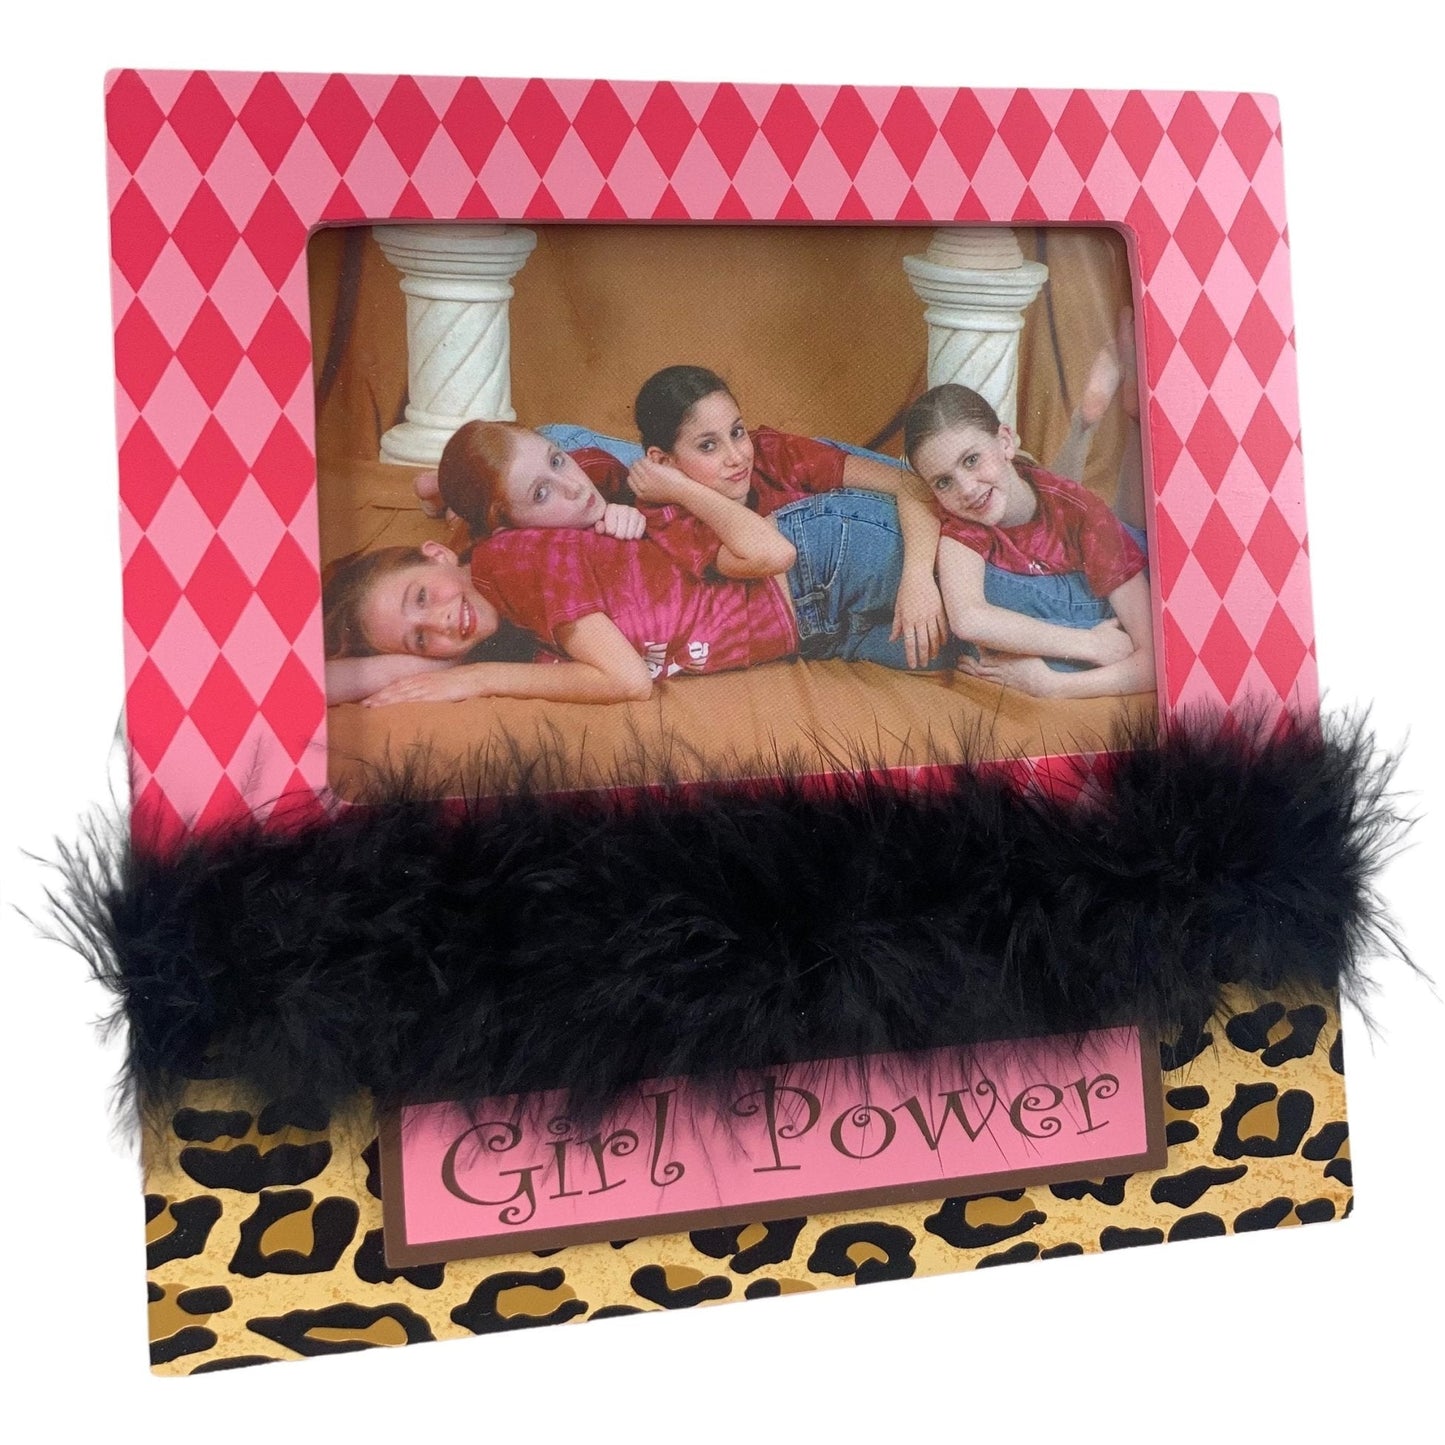 Girl Power, Pink and Cheetah Patterned Wooden Frame, 8 x 8 Inches - HH-WF-10534 - ToolUSA